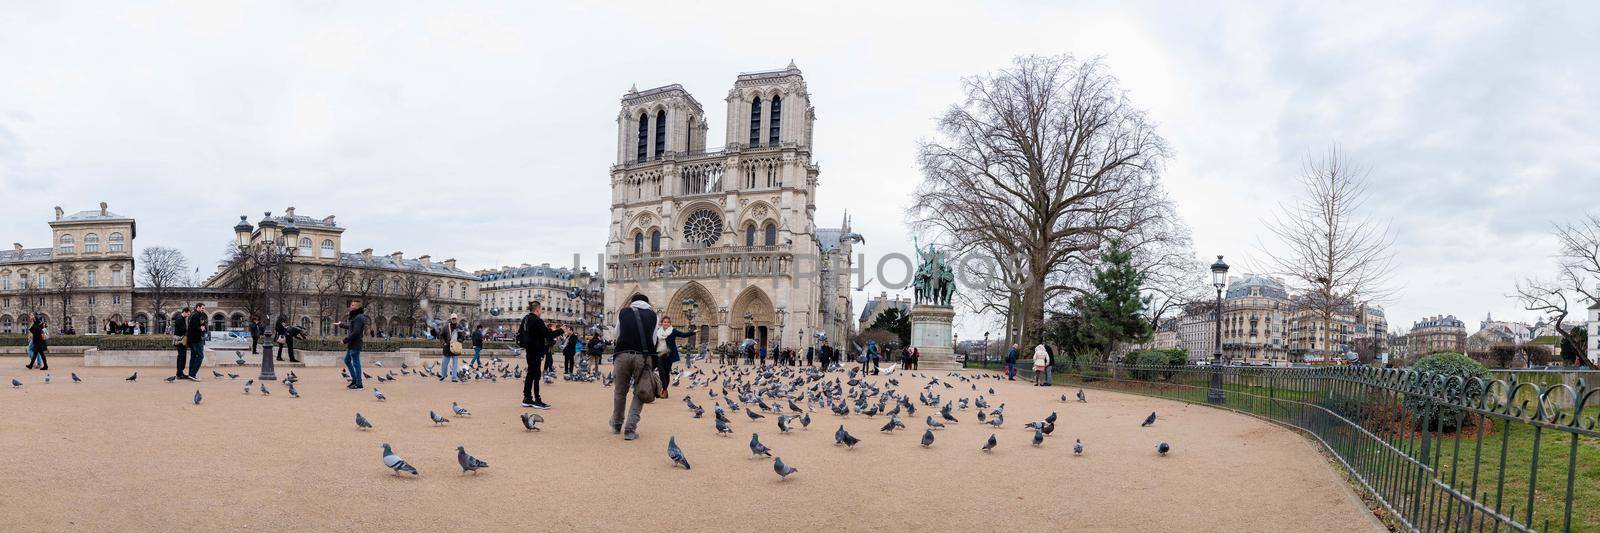 Paris, France - February 3, 2017: Wide angle view of doves and unidentified tourists in front of the Notre Dame de Paris. It is among the largest and most well-known church buildings in the world.